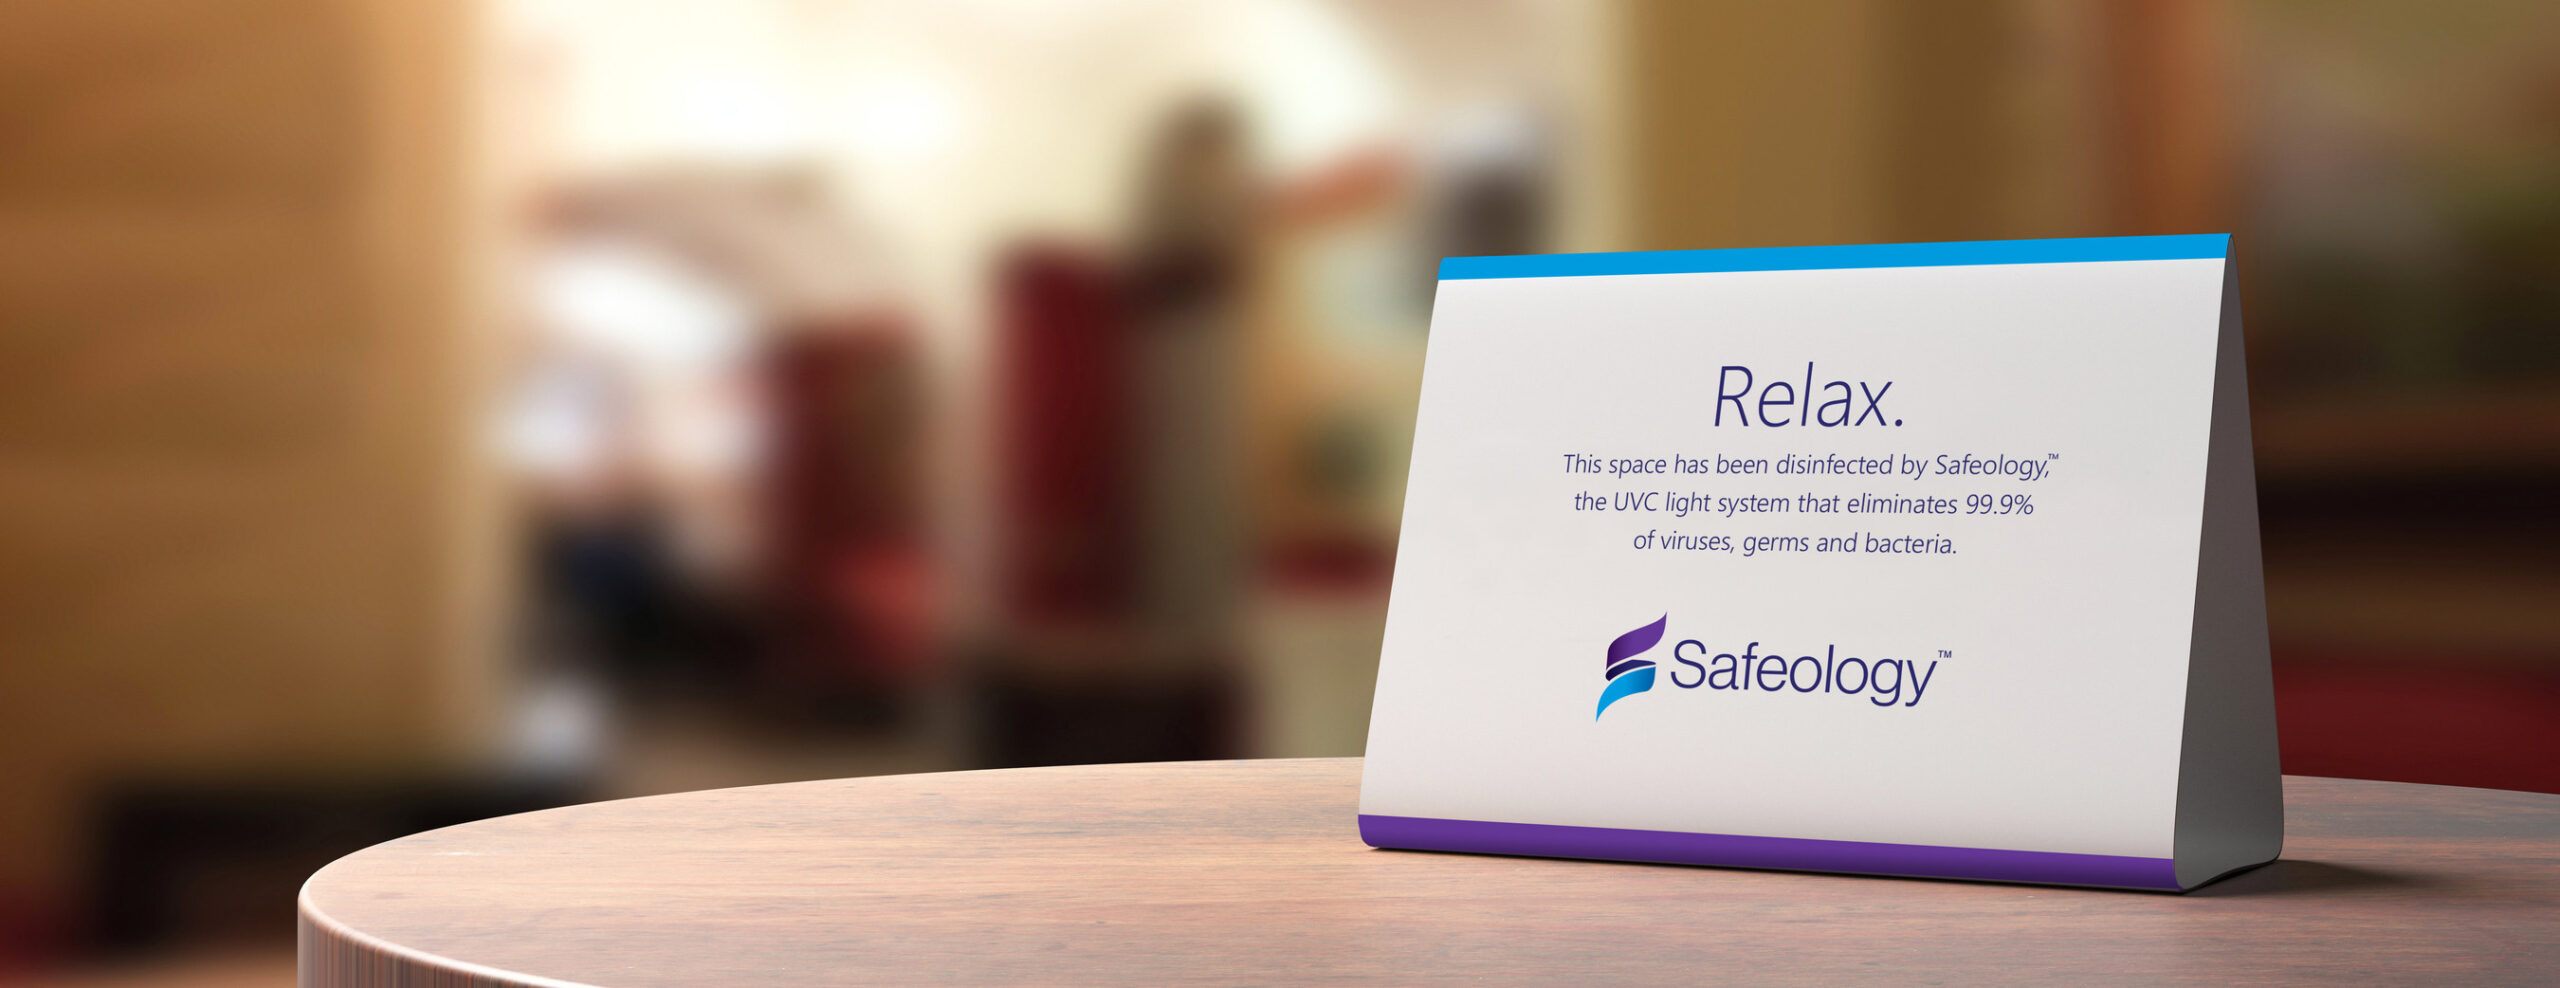 Safeology partners with customers to produce information and signage for customer properties, helping to communicate to the customers' guests and clients the spaces have been effectively disinfected.